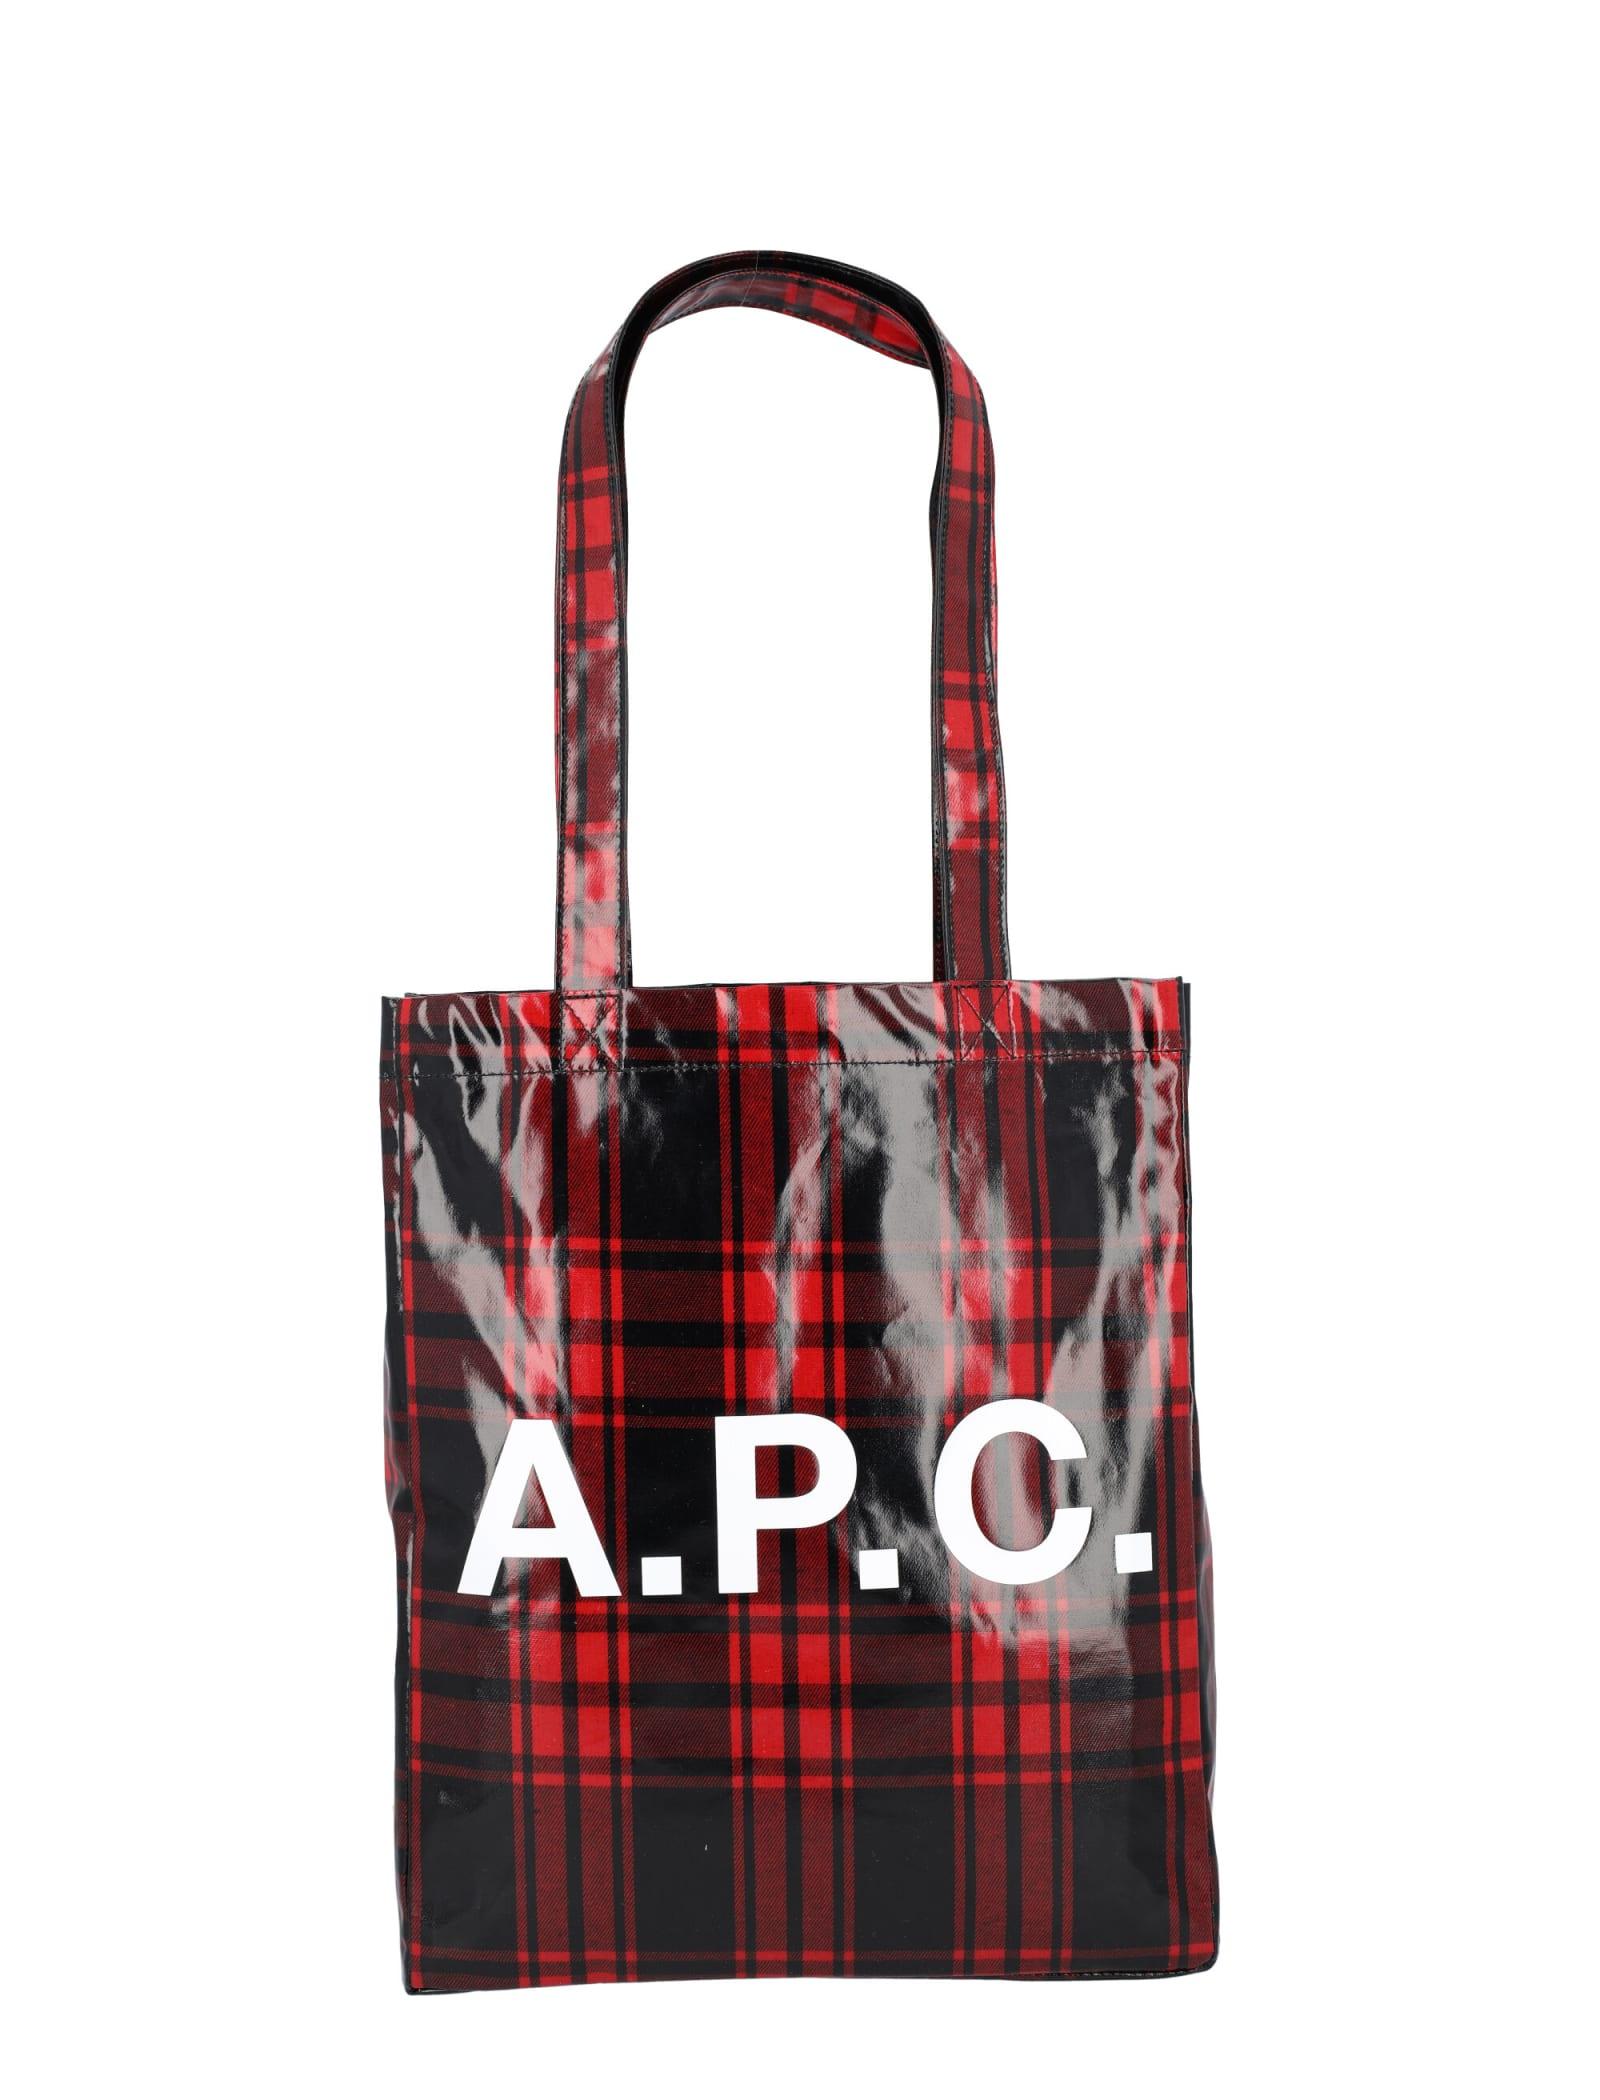 A.P.C. Canvas Lou Tote Bag in Red Check (Red) | Lyst